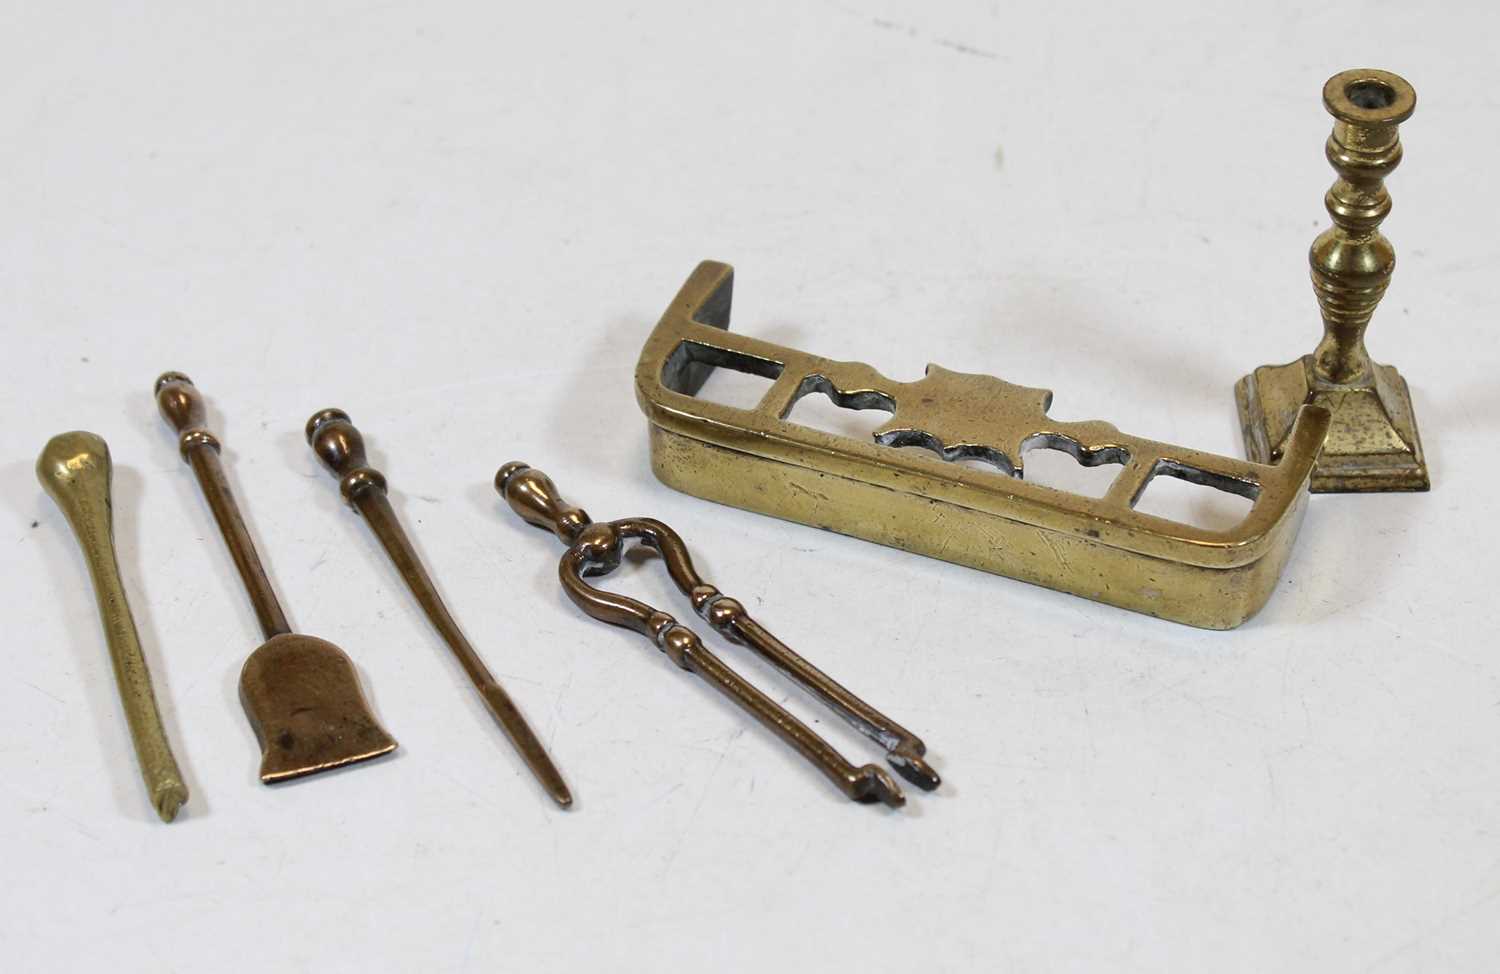 A miniature brass fire fender; together with miniature fire tongs, poker, shovel, and candlestick